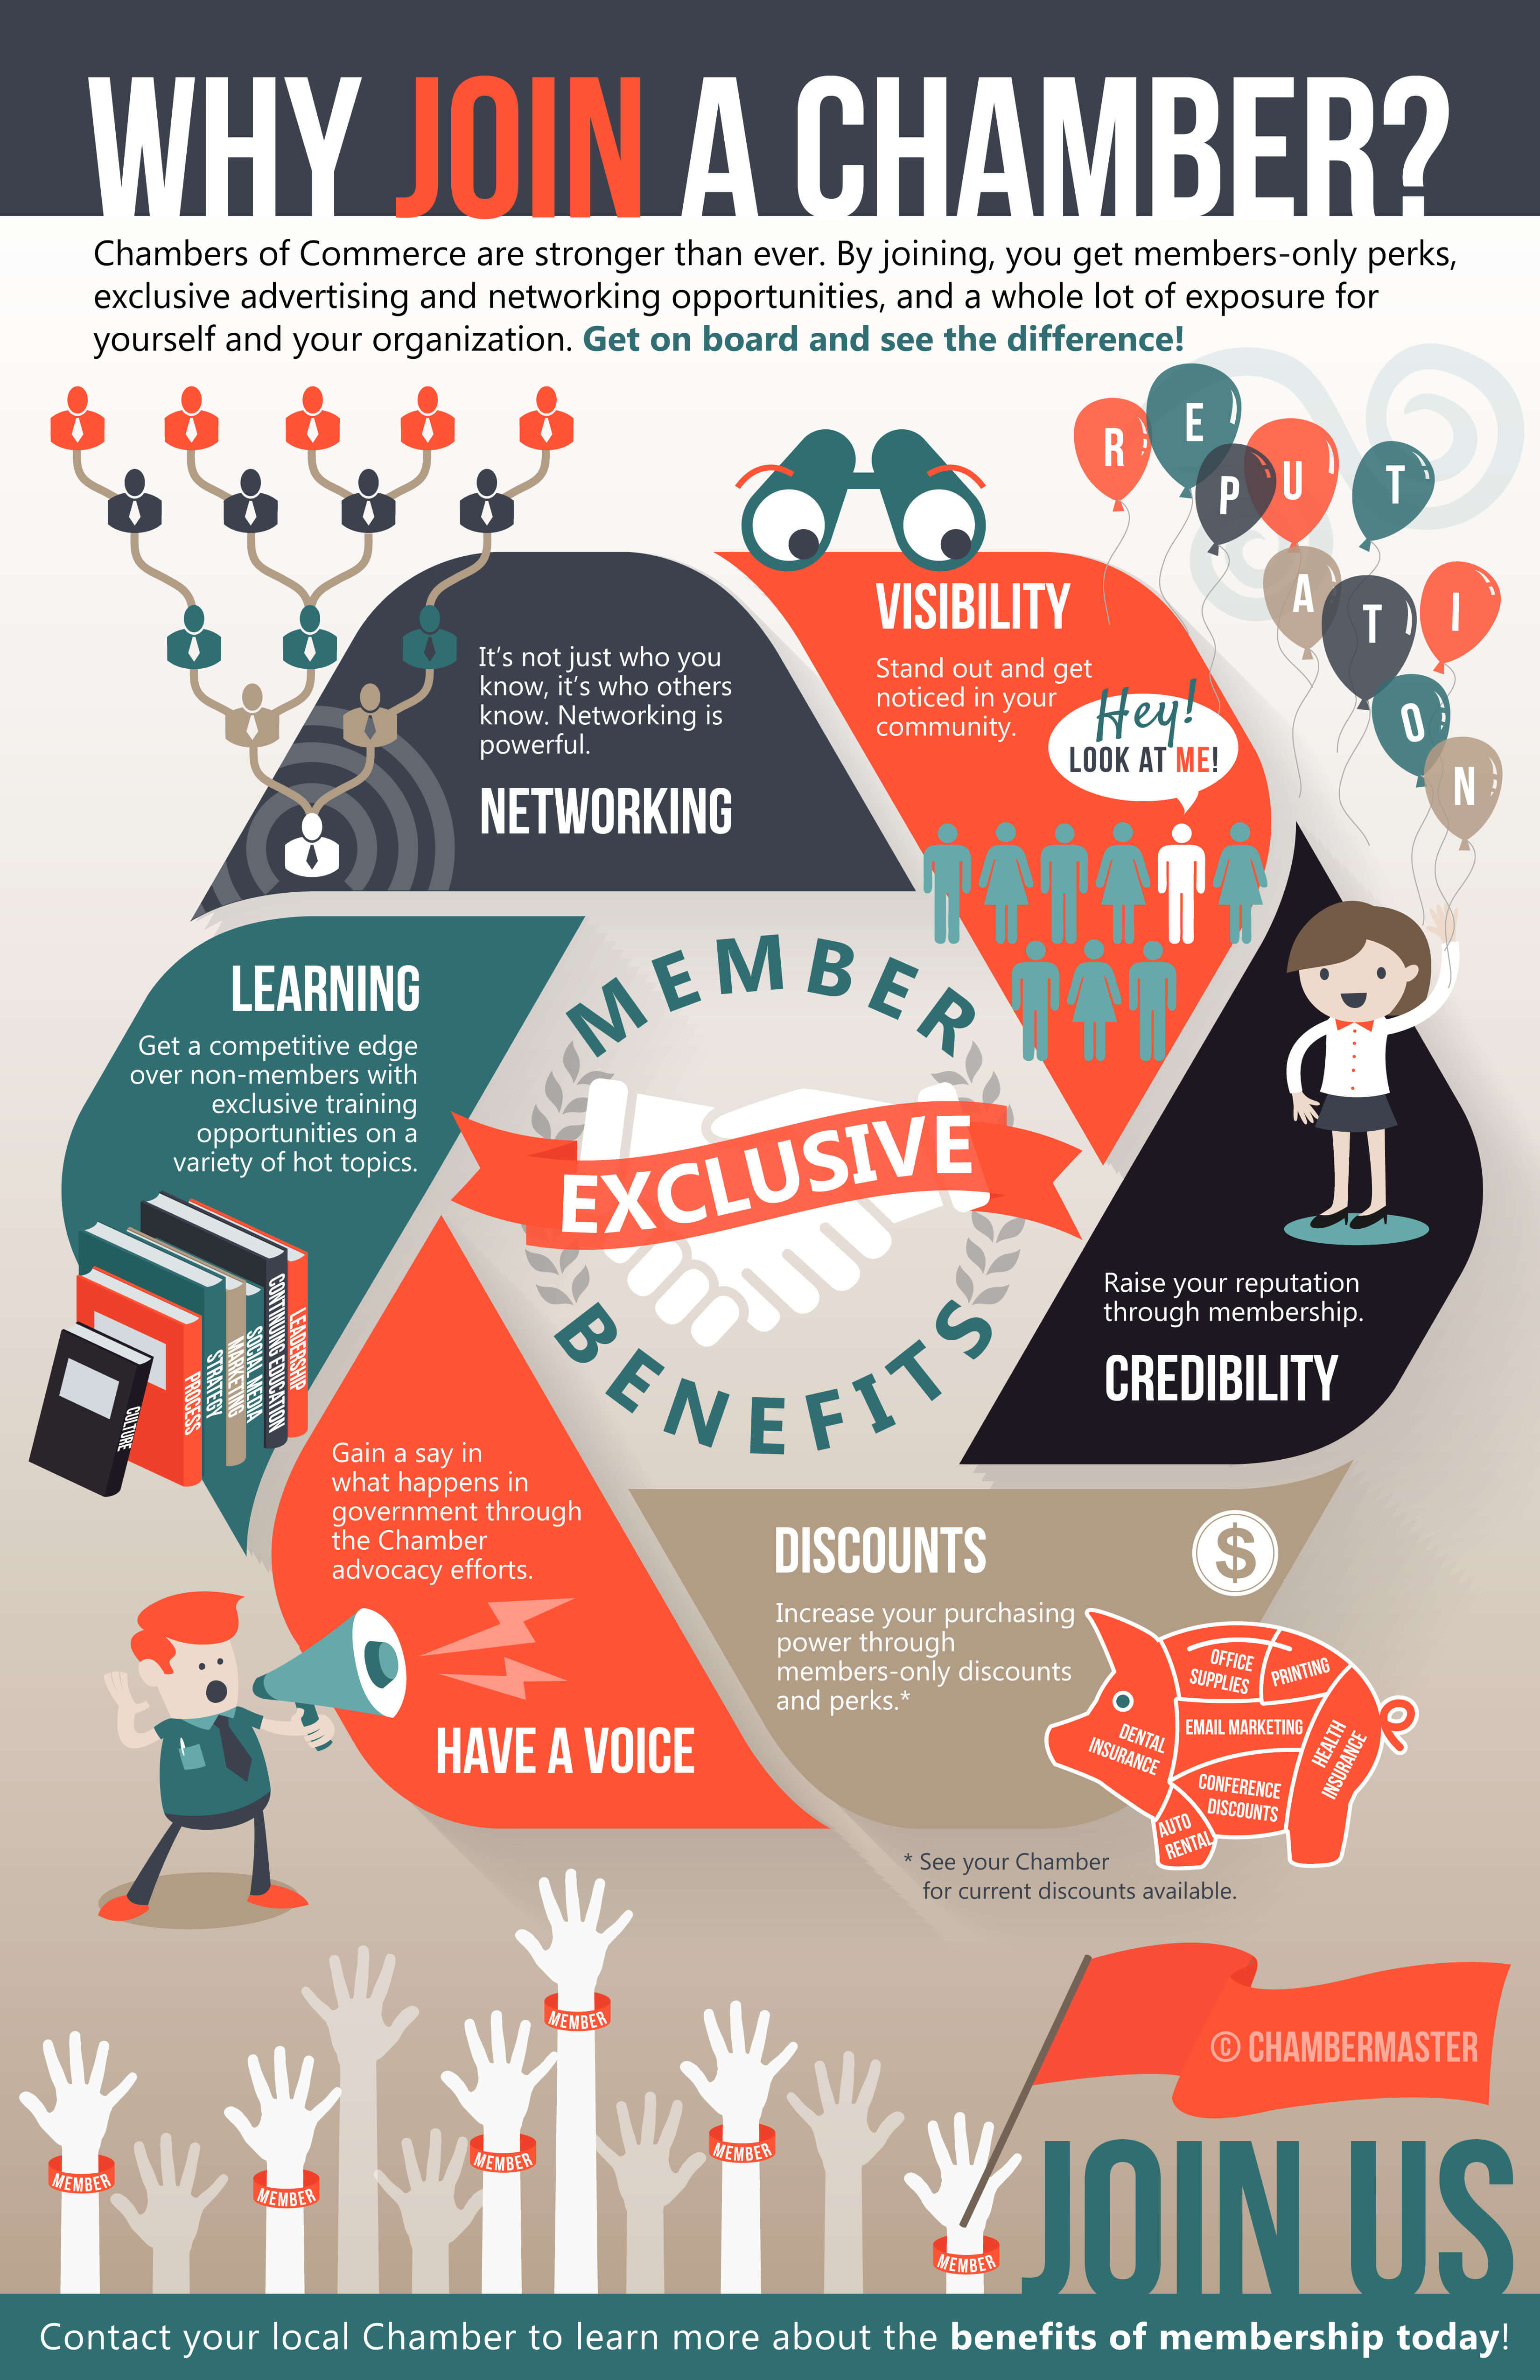 WhyJoinChamber_infographic_CM